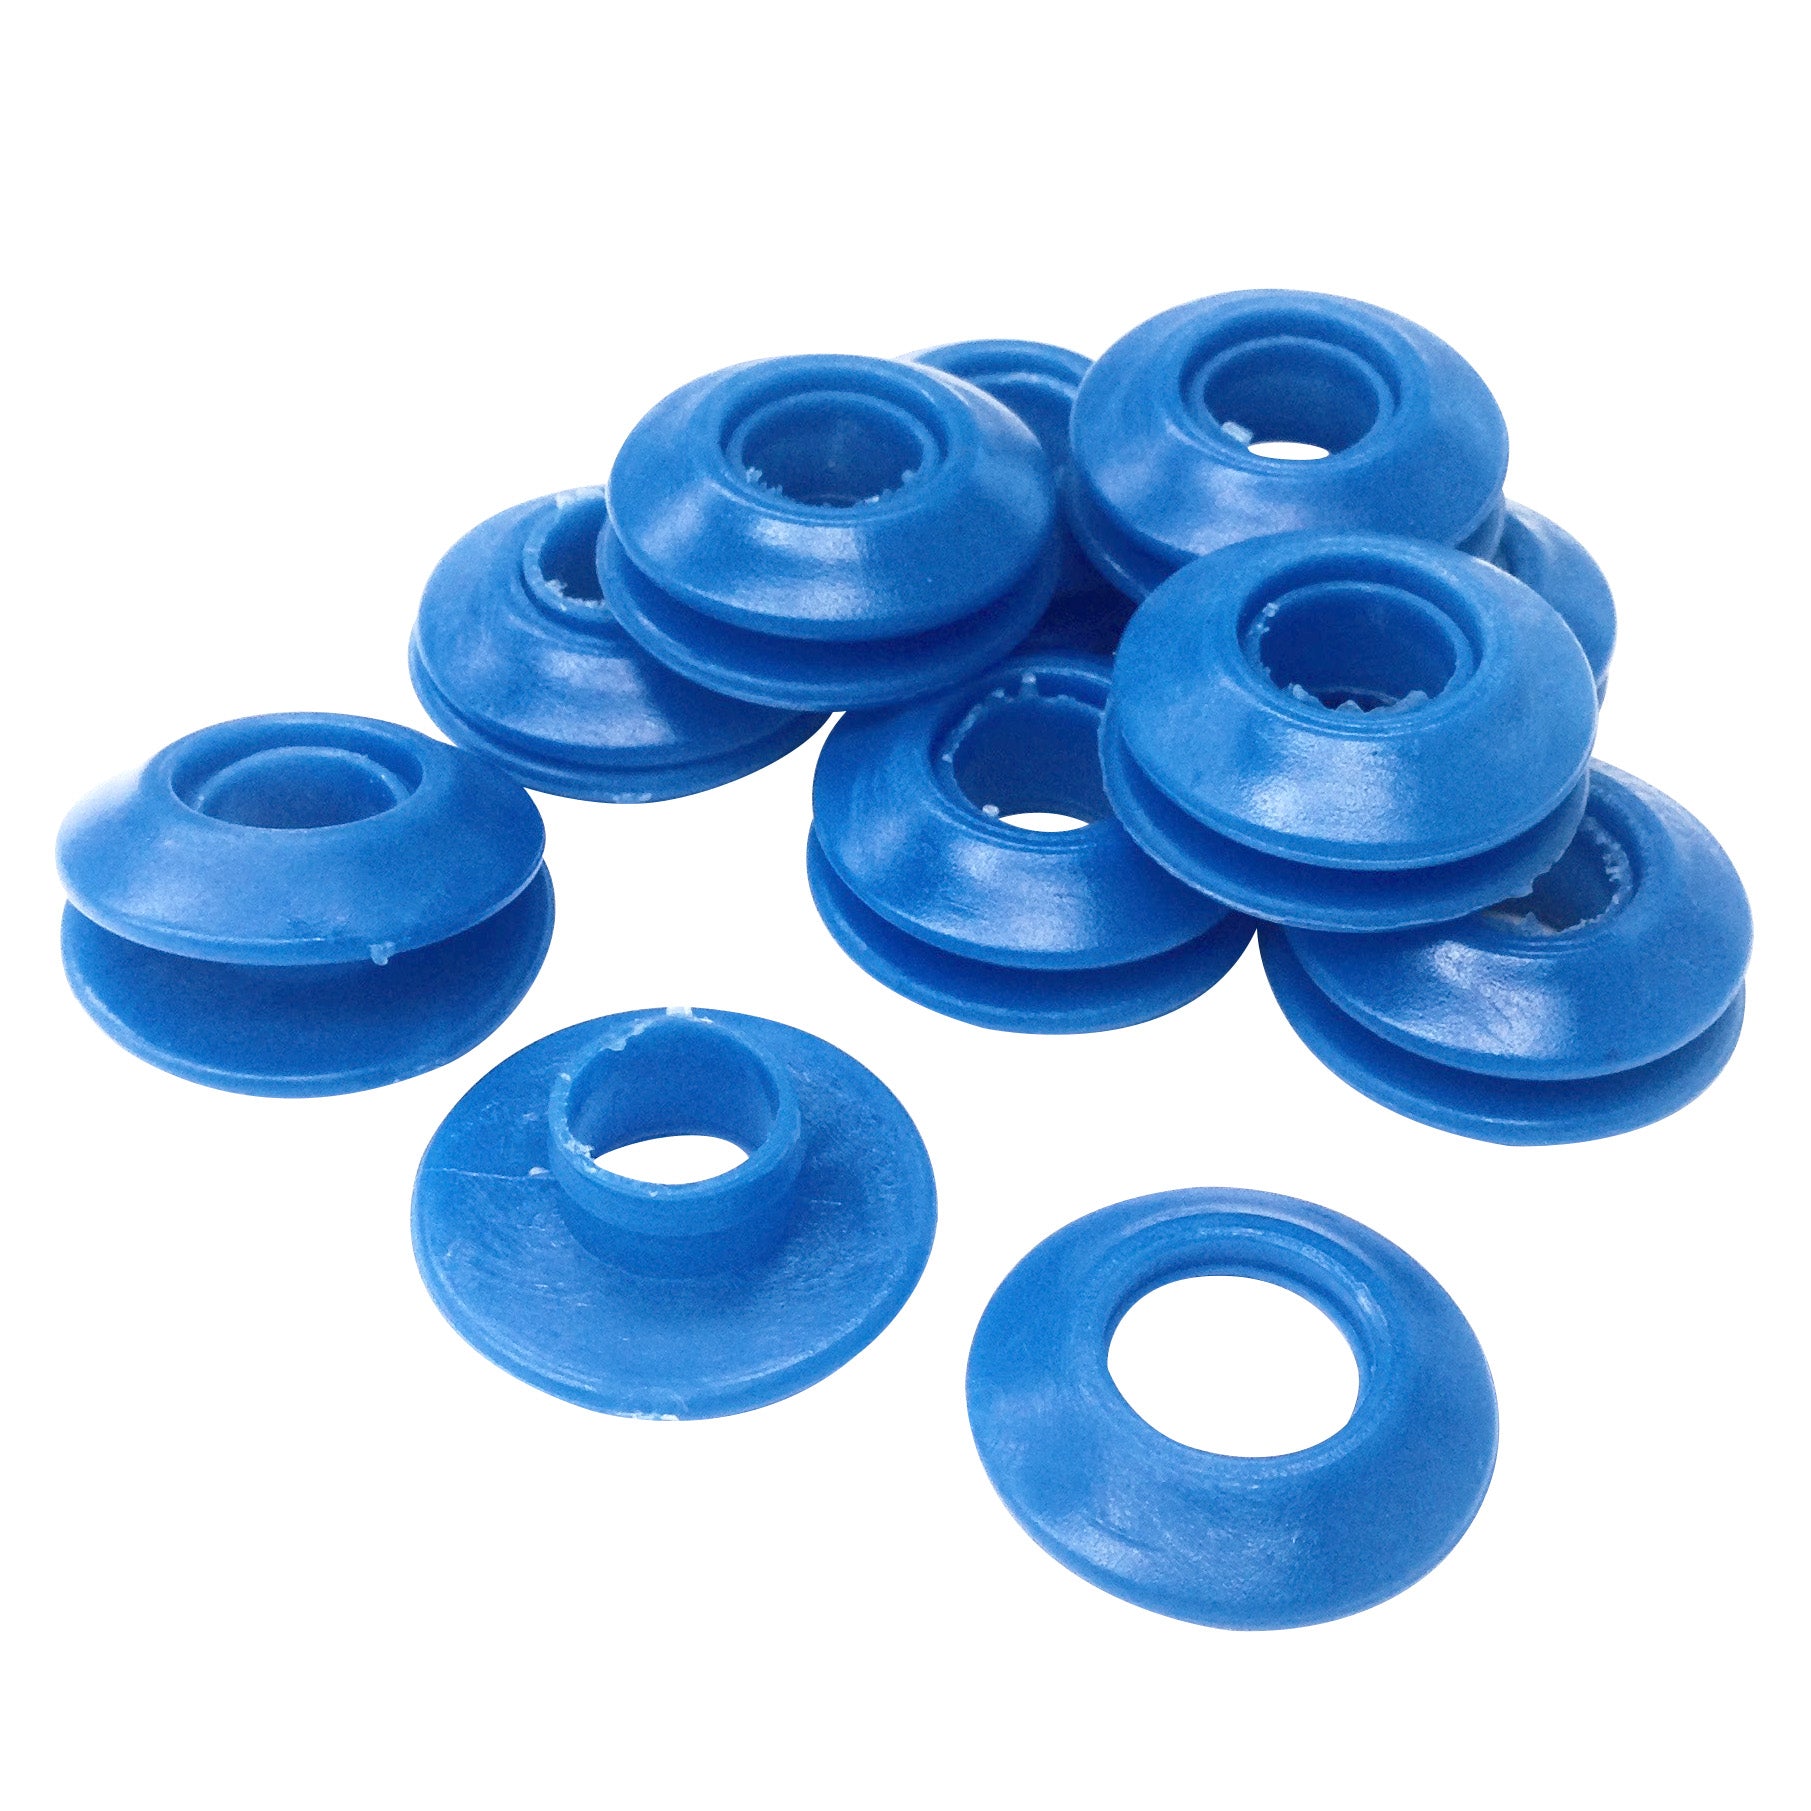 Grommets - Plastic-eSafety Supplies, Inc